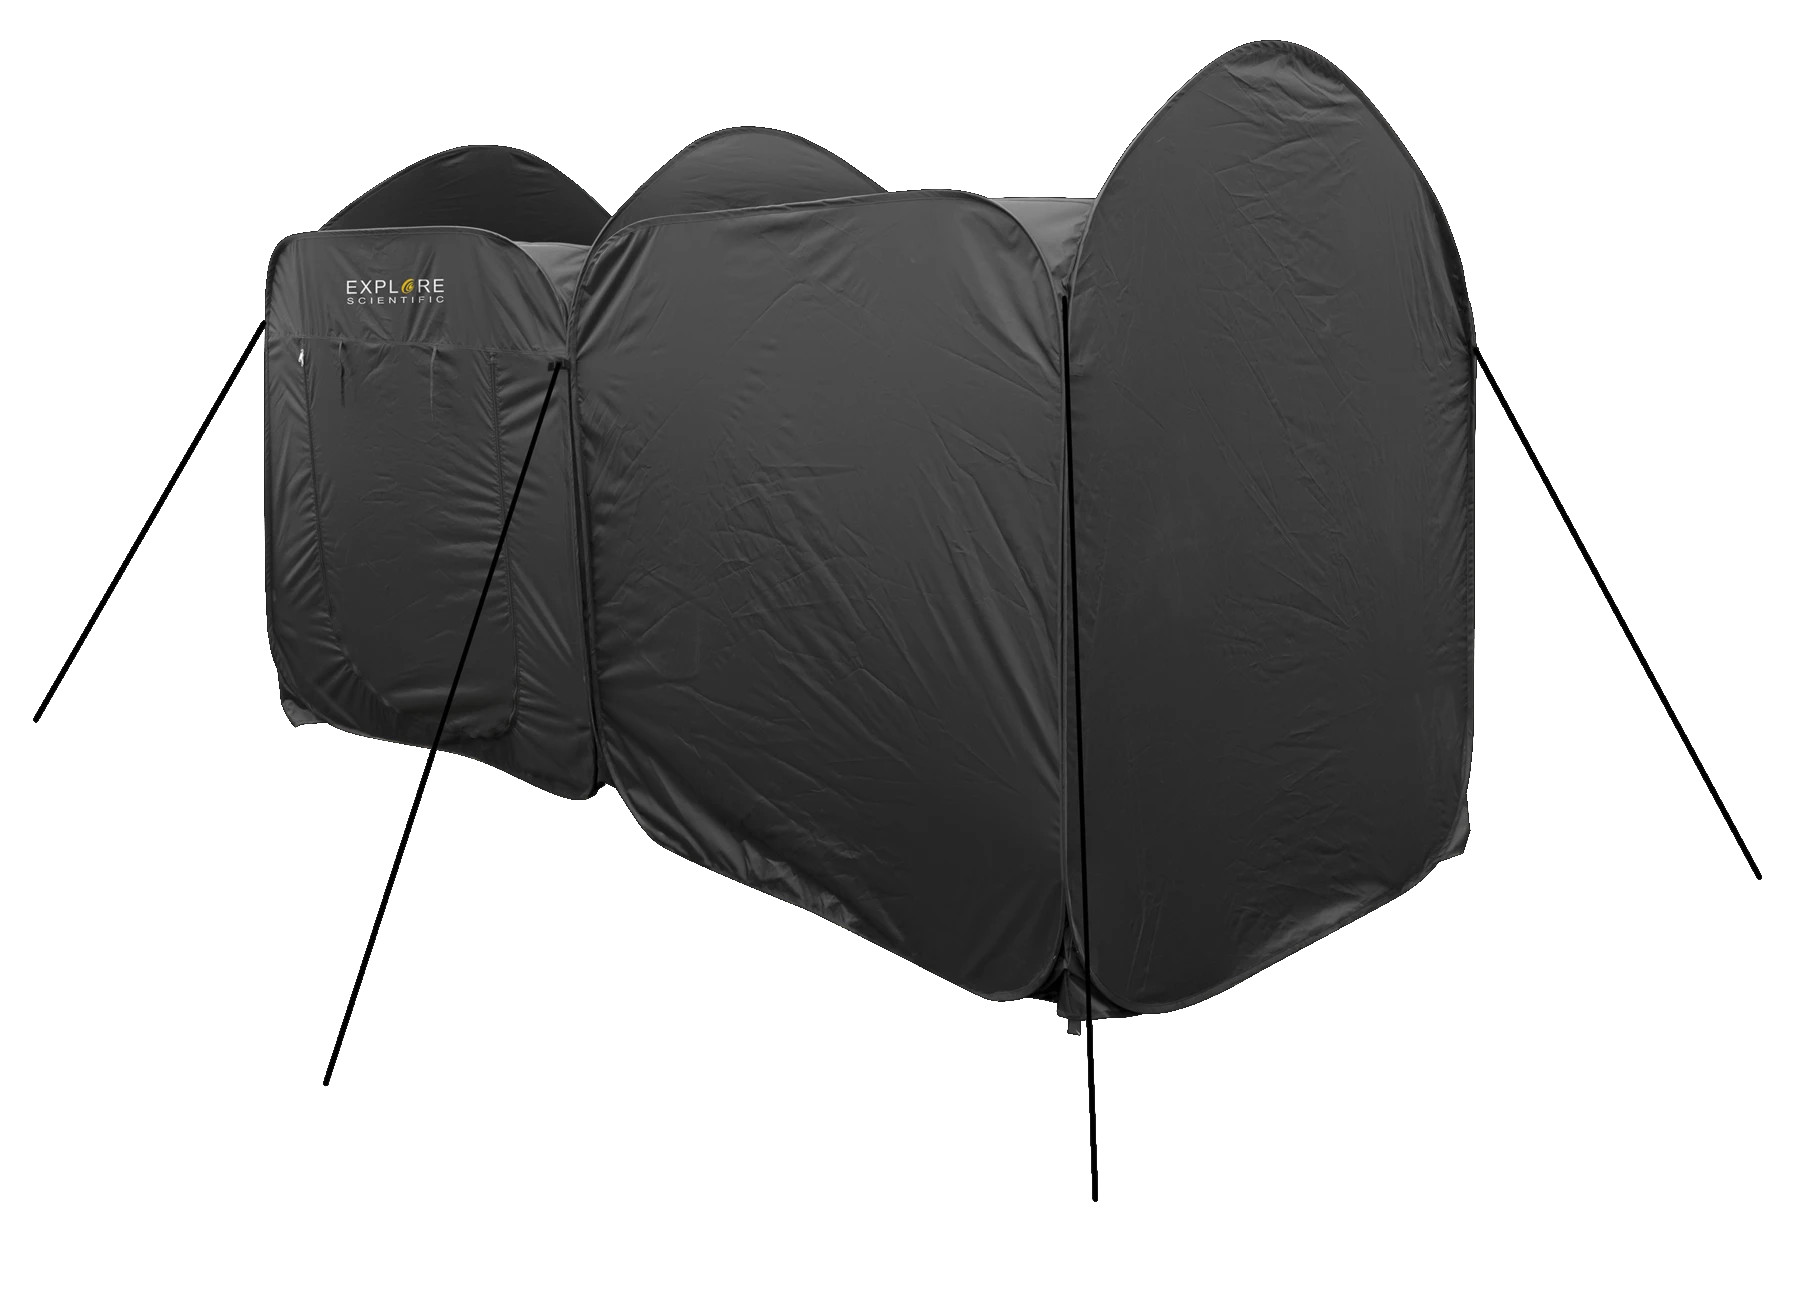 EXPLORE SCIENTIFIC Two-Room Pop-UP Observatory Tent / Weather protection for telescopes